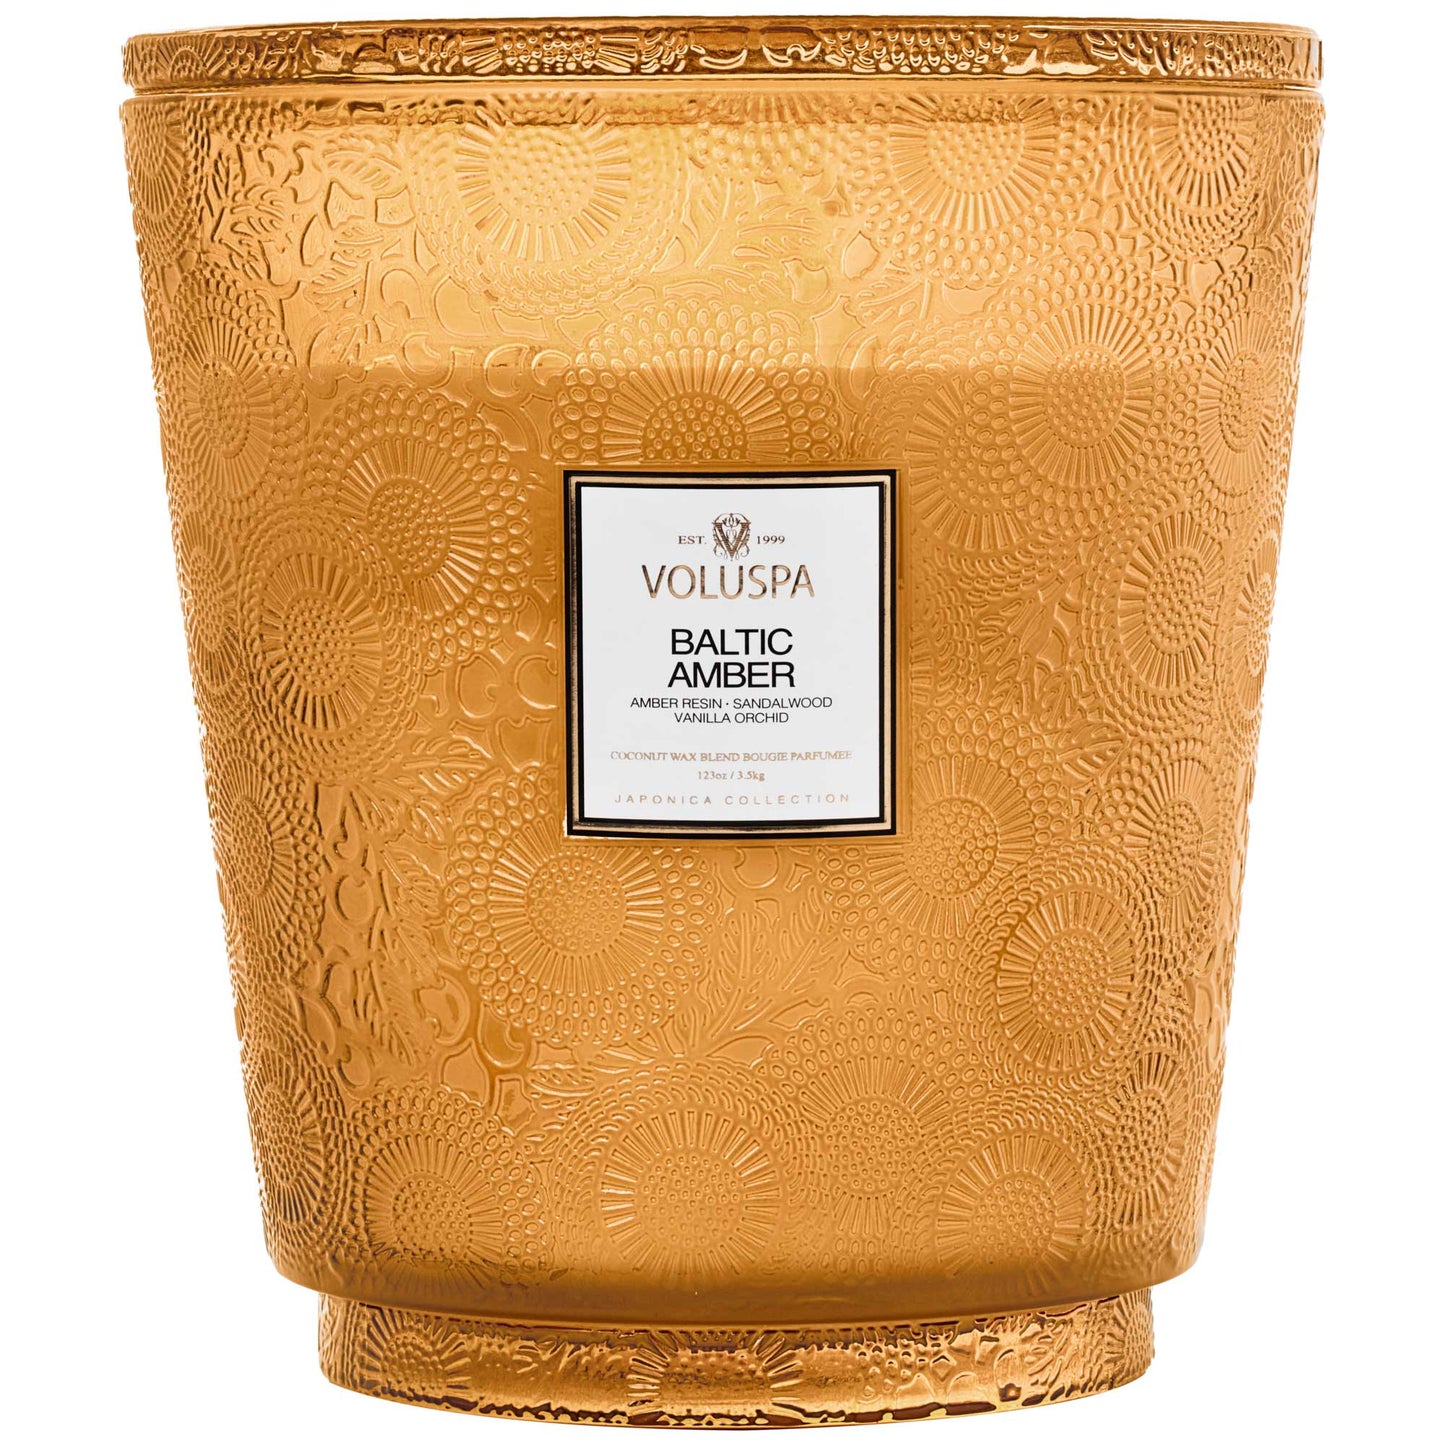 Baltic Amber Hearth Candle